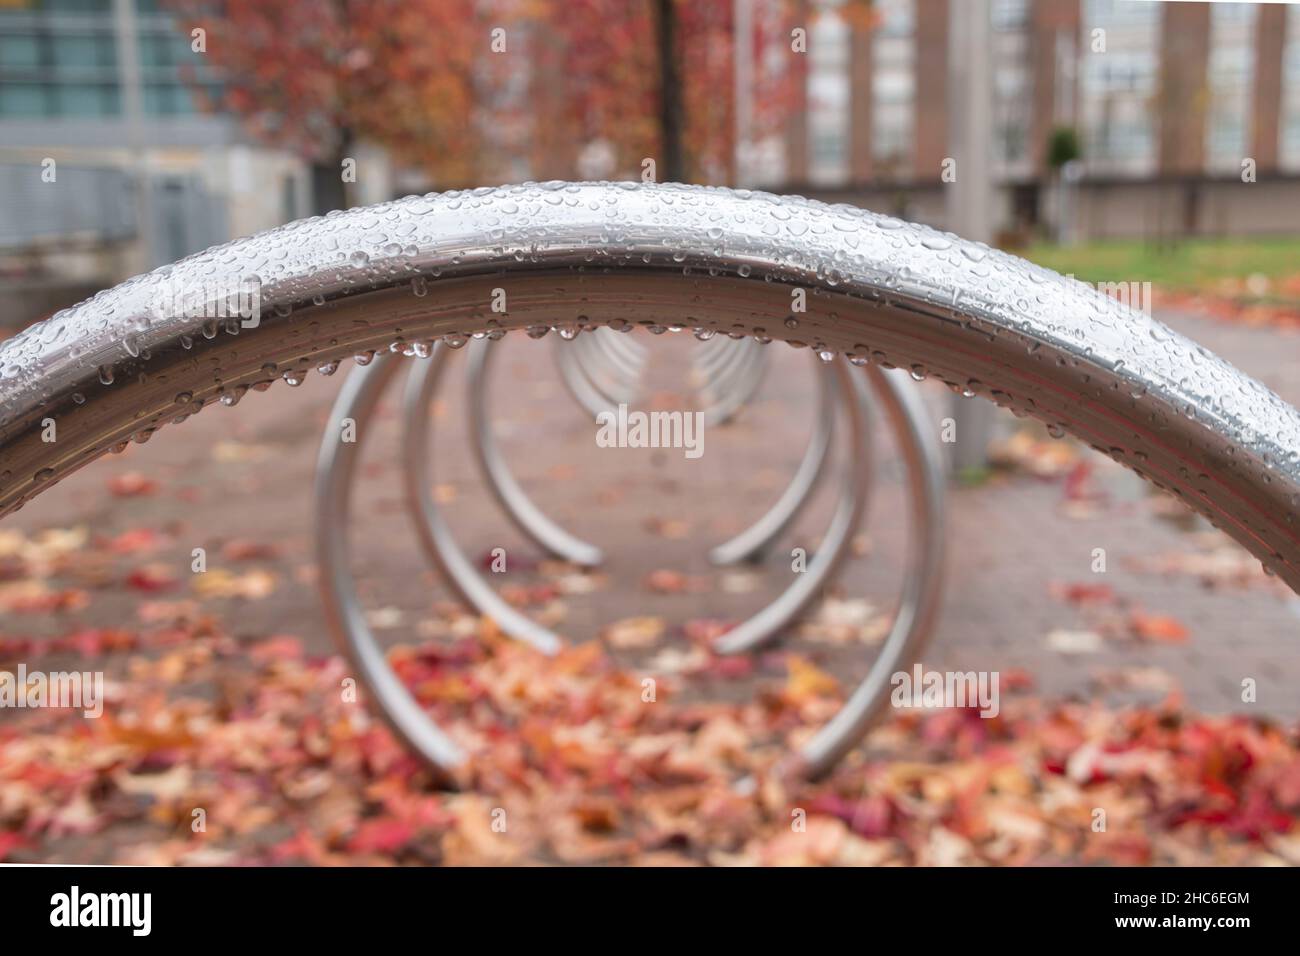 Close-up shot of the raindrop on a bench Stock Photo